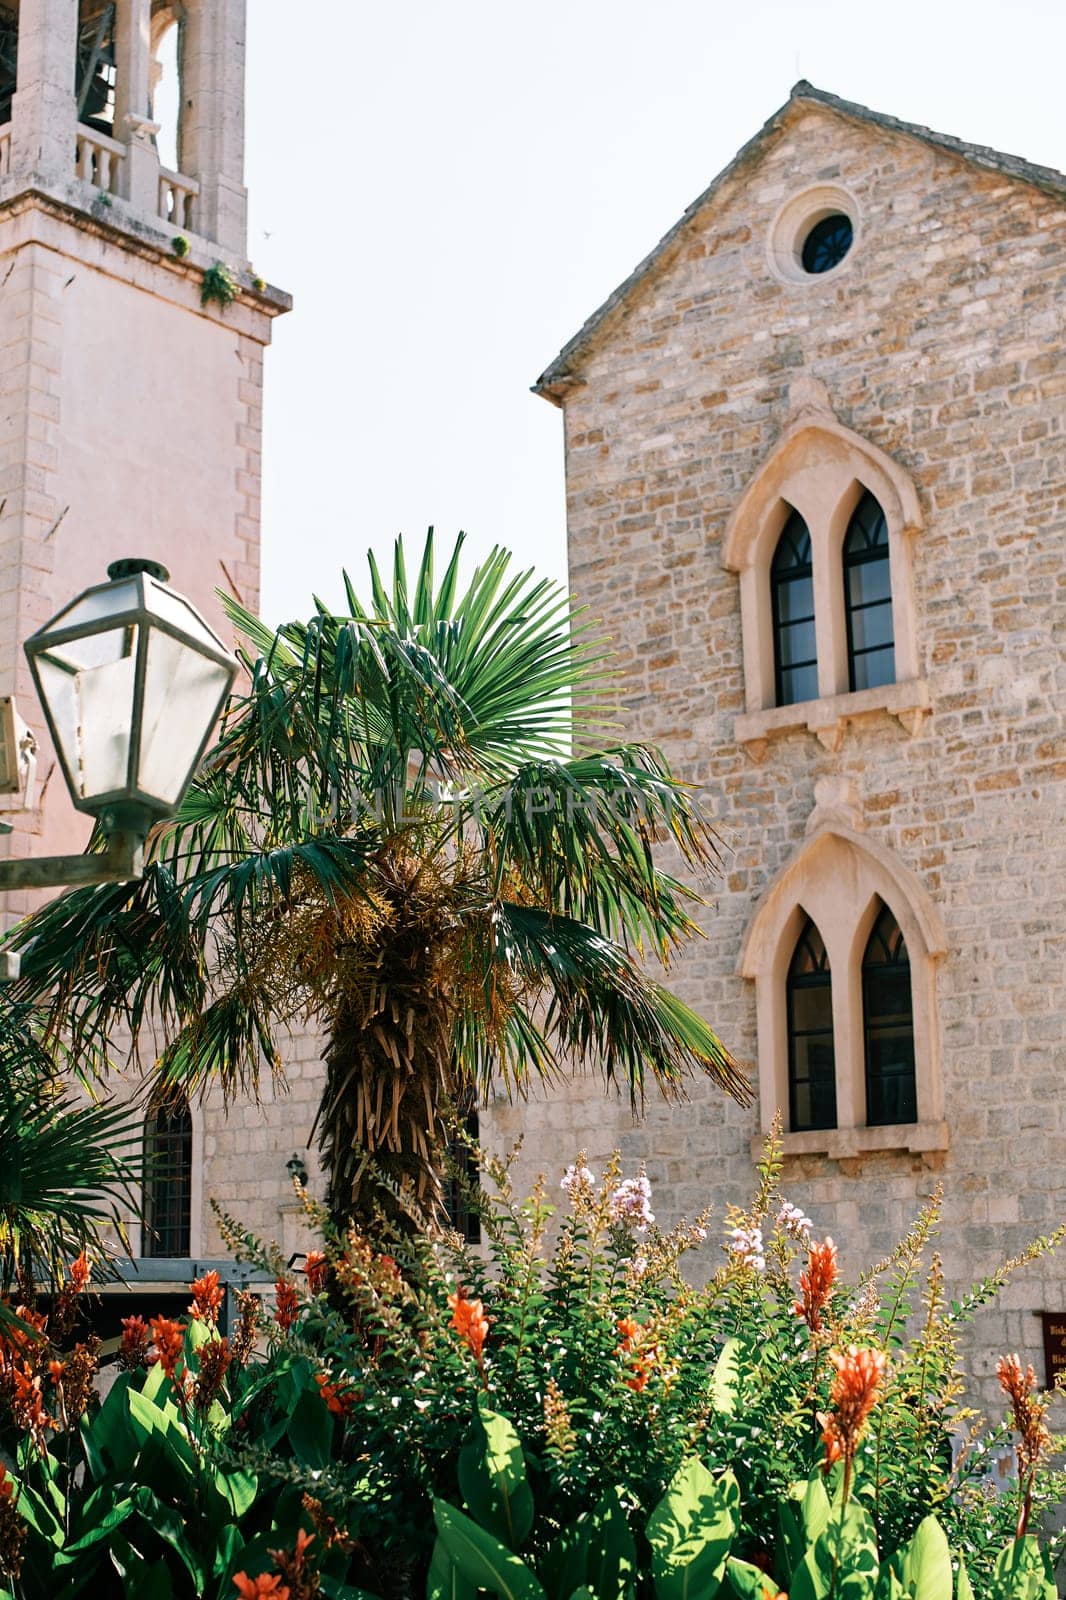 Green palm tree and a flowering bush grow in the courtyard of an old stone church. High quality photo